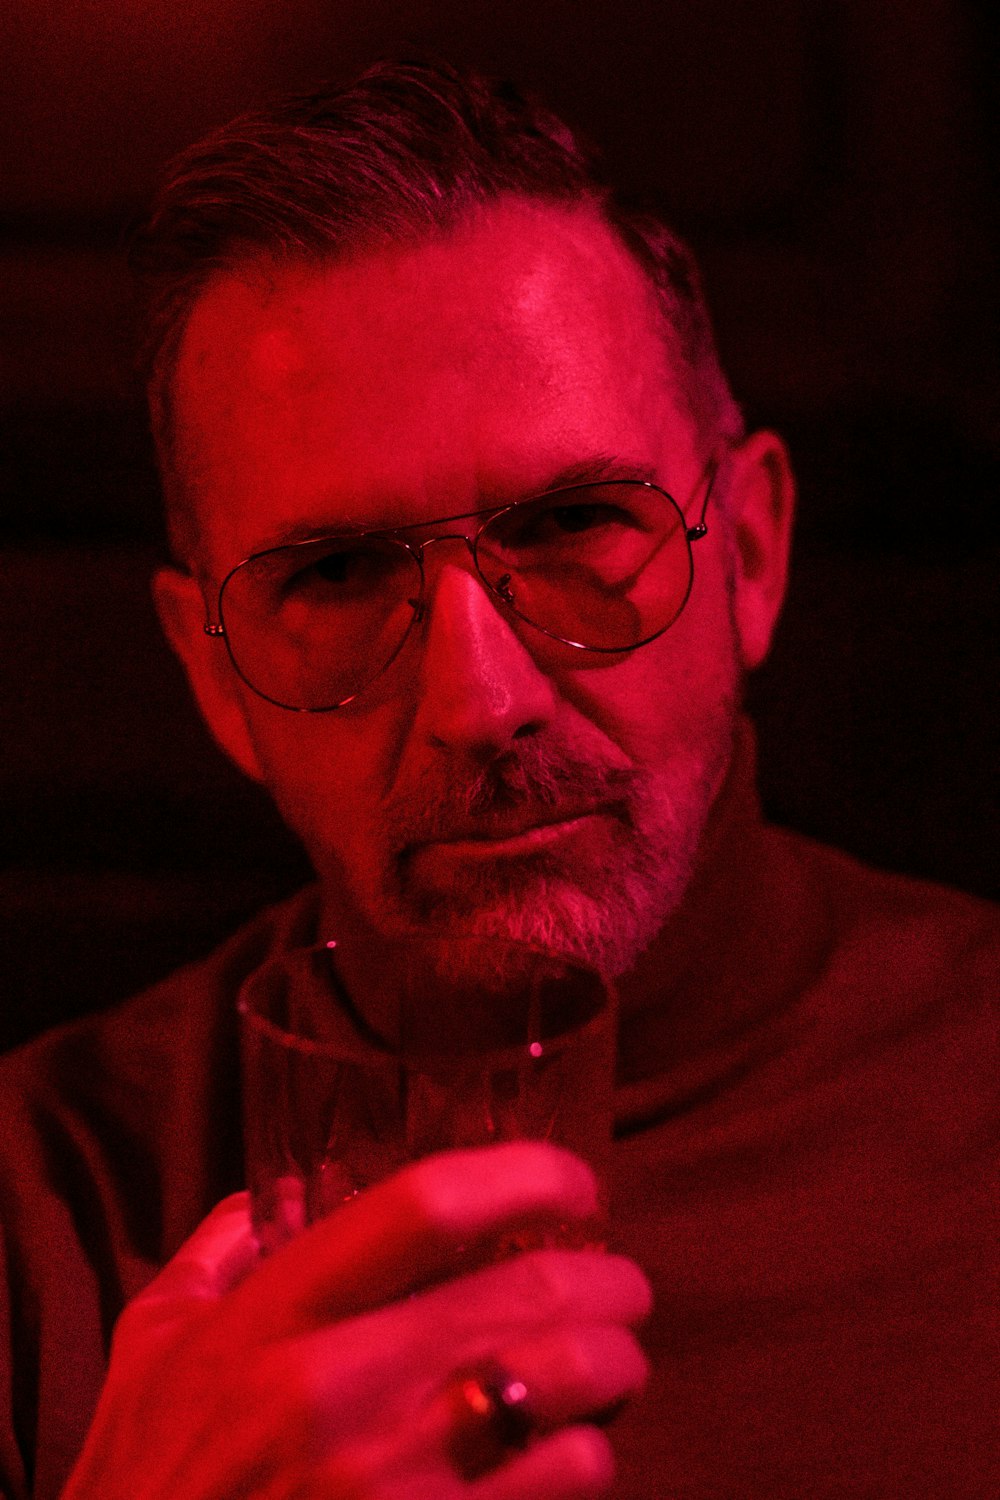 a man with glasses holding a wine glass